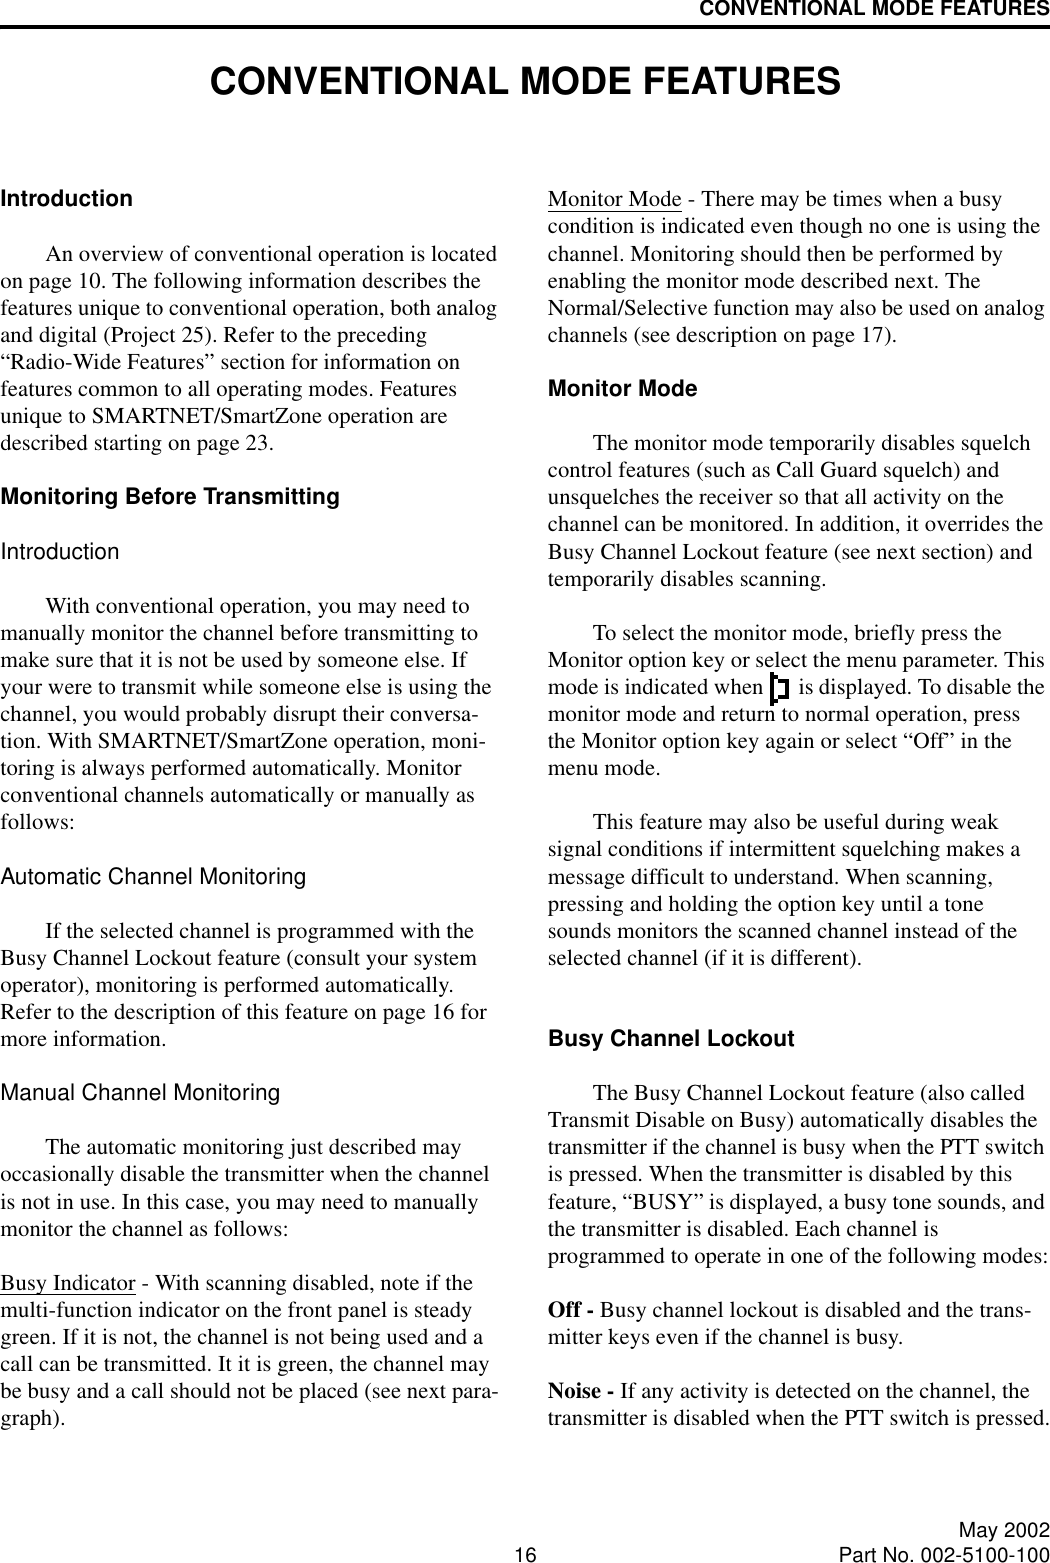 16 May 2002Part No. 002-5100-100CONVENTIONAL MODE FEATURESCONVENTIONAL MODE FEATURESIntroductionAn overview of conventional operation is located on page 10. The following information describes the features unique to conventional operation, both analog and digital (Project 25). Refer to the preceding “Radio-Wide Features” section for information on features common to all operating modes. Features unique to SMARTNET/SmartZone operation are described starting on page 23.Monitoring Before TransmittingIntroductionWith conventional operation, you may need to manually monitor the channel before transmitting to make sure that it is not be used by someone else. If your were to transmit while someone else is using the channel, you would probably disrupt their conversa-tion. With SMARTNET/SmartZone operation, moni-toring is always performed automatically. Monitor conventional channels automatically or manually as follows:Automatic Channel MonitoringIf the selected channel is programmed with the Busy Channel Lockout feature (consult your system operator), monitoring is performed automatically. Refer to the description of this feature on page 16 for more information.Manual Channel MonitoringThe automatic monitoring just described may occasionally disable the transmitter when the channel is not in use. In this case, you may need to manually monitor the channel as follows:Busy Indicator - With scanning disabled, note if the multi-function indicator on the front panel is steady green. If it is not, the channel is not being used and a call can be transmitted. It it is green, the channel may be busy and a call should not be placed (see next para-graph). Monitor Mode - There may be times when a busy condition is indicated even though no one is using the channel. Monitoring should then be performed by enabling the monitor mode described next. The Normal/Selective function may also be used on analog channels (see description on page 17). Monitor ModeThe monitor mode temporarily disables squelch control features (such as Call Guard squelch) and unsquelches the receiver so that all activity on the channel can be monitored. In addition, it overrides the Busy Channel Lockout feature (see next section) and temporarily disables scanning. To select the monitor mode, briefly press the Monitor option key or select the menu parameter. This mode is indicated when   is displayed. To disable the monitor mode and return to normal operation, press the Monitor option key again or select “Off” in the menu mode.This feature may also be useful during weak signal conditions if intermittent squelching makes a message difficult to understand. When scanning, pressing and holding the option key until a tone sounds monitors the scanned channel instead of the selected channel (if it is different). Busy Channel LockoutThe Busy Channel Lockout feature (also called Transmit Disable on Busy) automatically disables the transmitter if the channel is busy when the PTT switch is pressed. When the transmitter is disabled by this feature, “BUSY” is displayed, a busy tone sounds, and the transmitter is disabled. Each channel is programmed to operate in one of the following modes:Off - Busy channel lockout is disabled and the trans-mitter keys even if the channel is busy.Noise - If any activity is detected on the channel, the transmitter is disabled when the PTT switch is pressed.